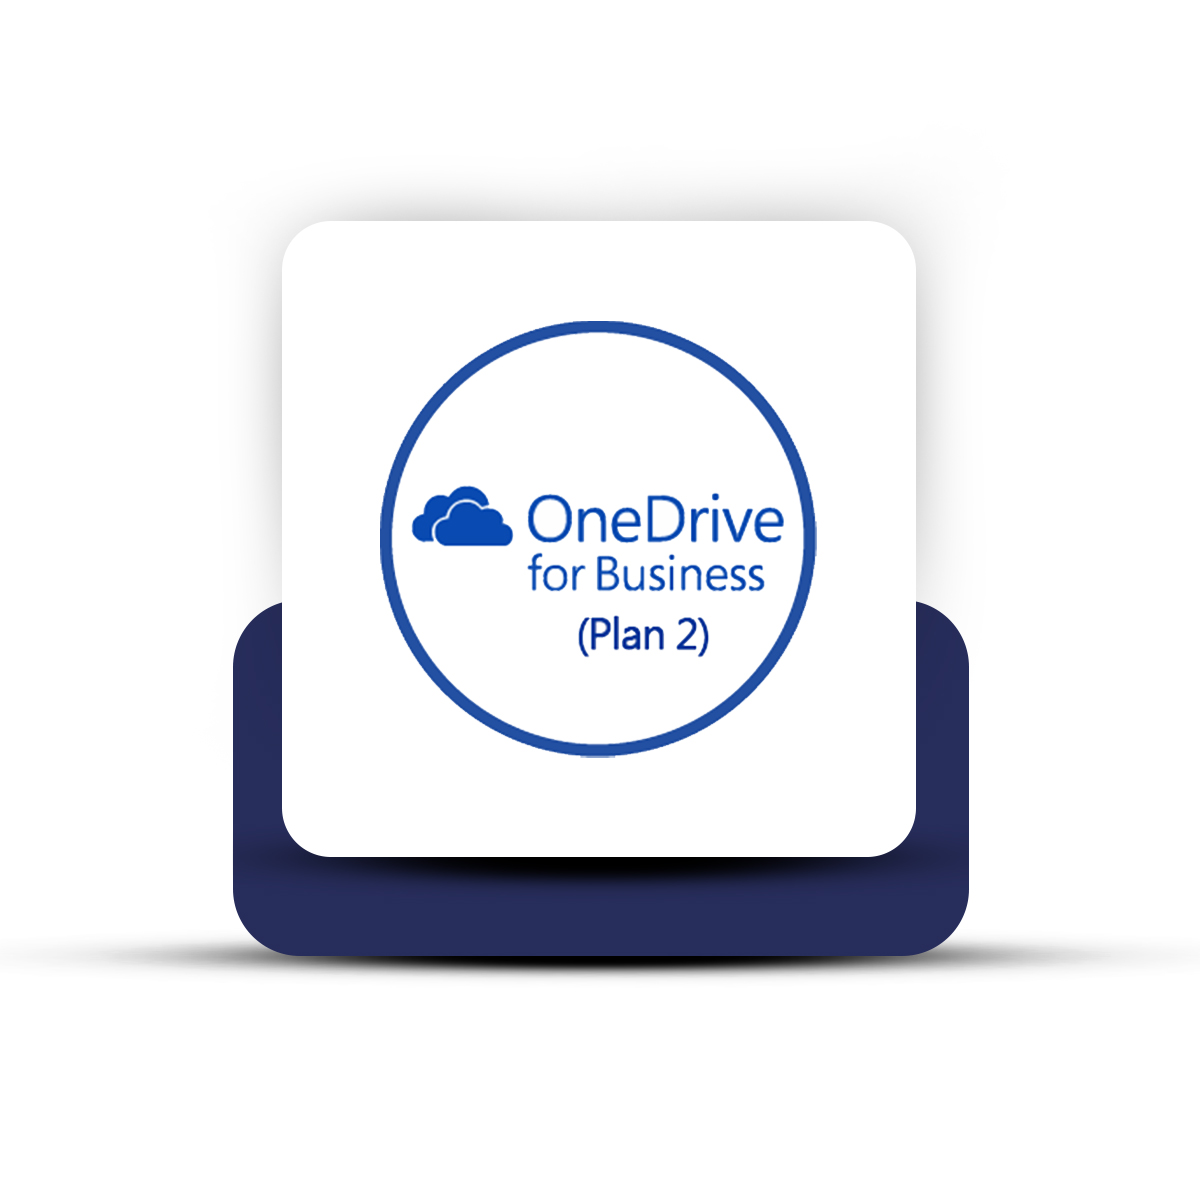 microsoft 365 onedrive for business plan 2